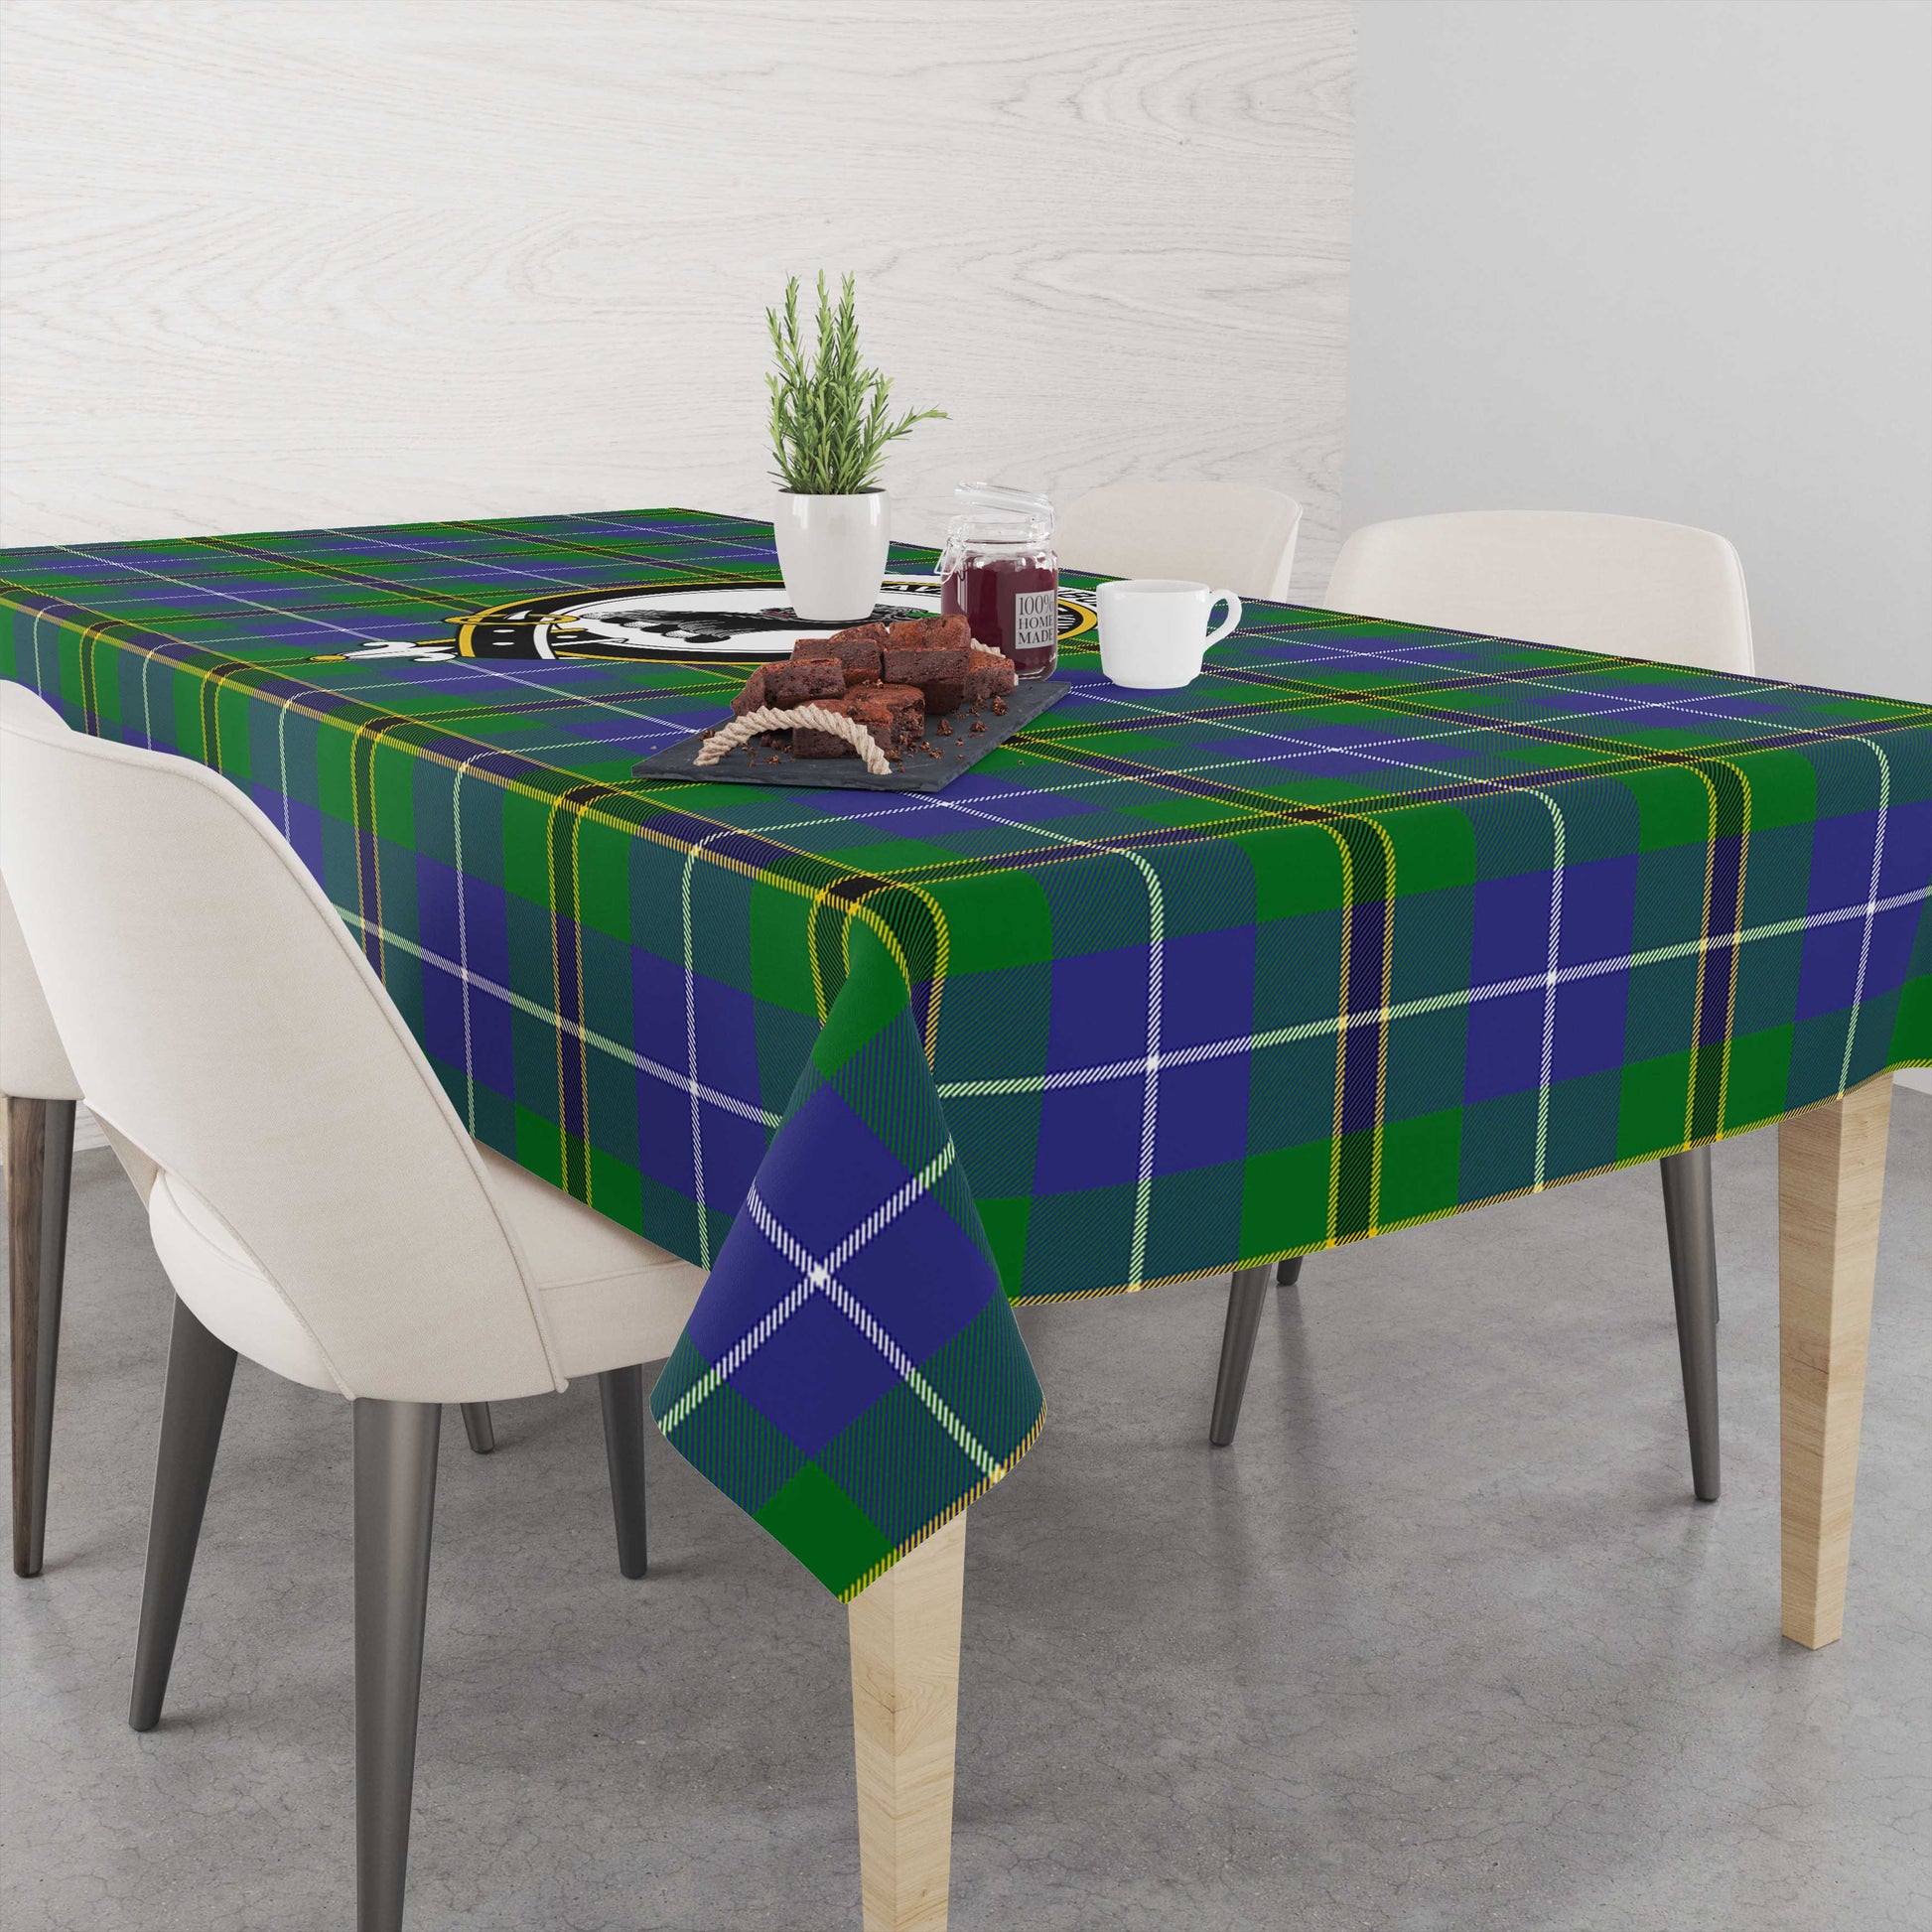 turnbull-hunting-tatan-tablecloth-with-family-crest